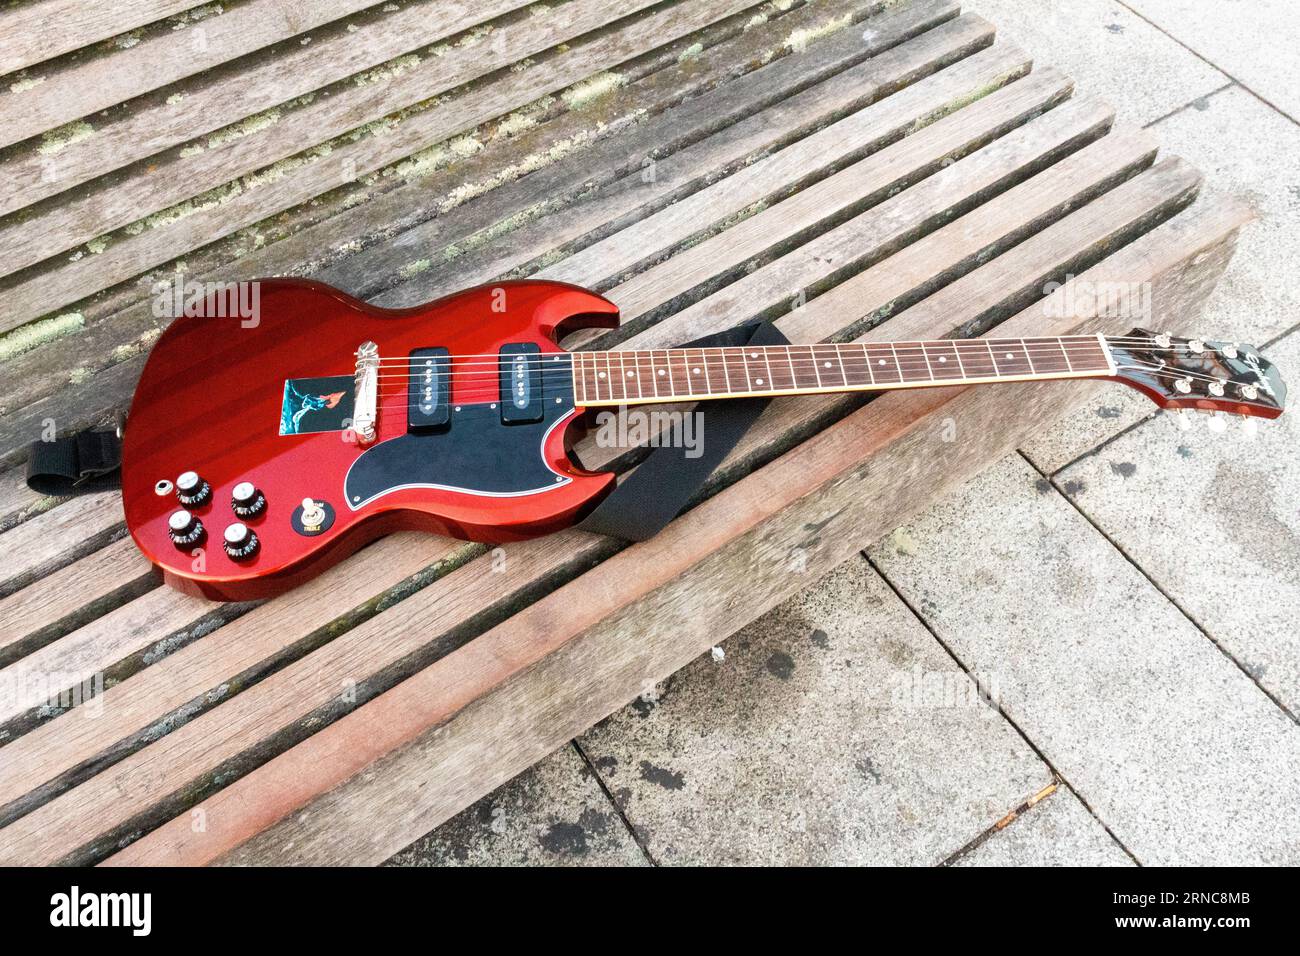 A red electronic guitar was left on top of a wooden street bench. High-quality wide-shot photo Stock Photo